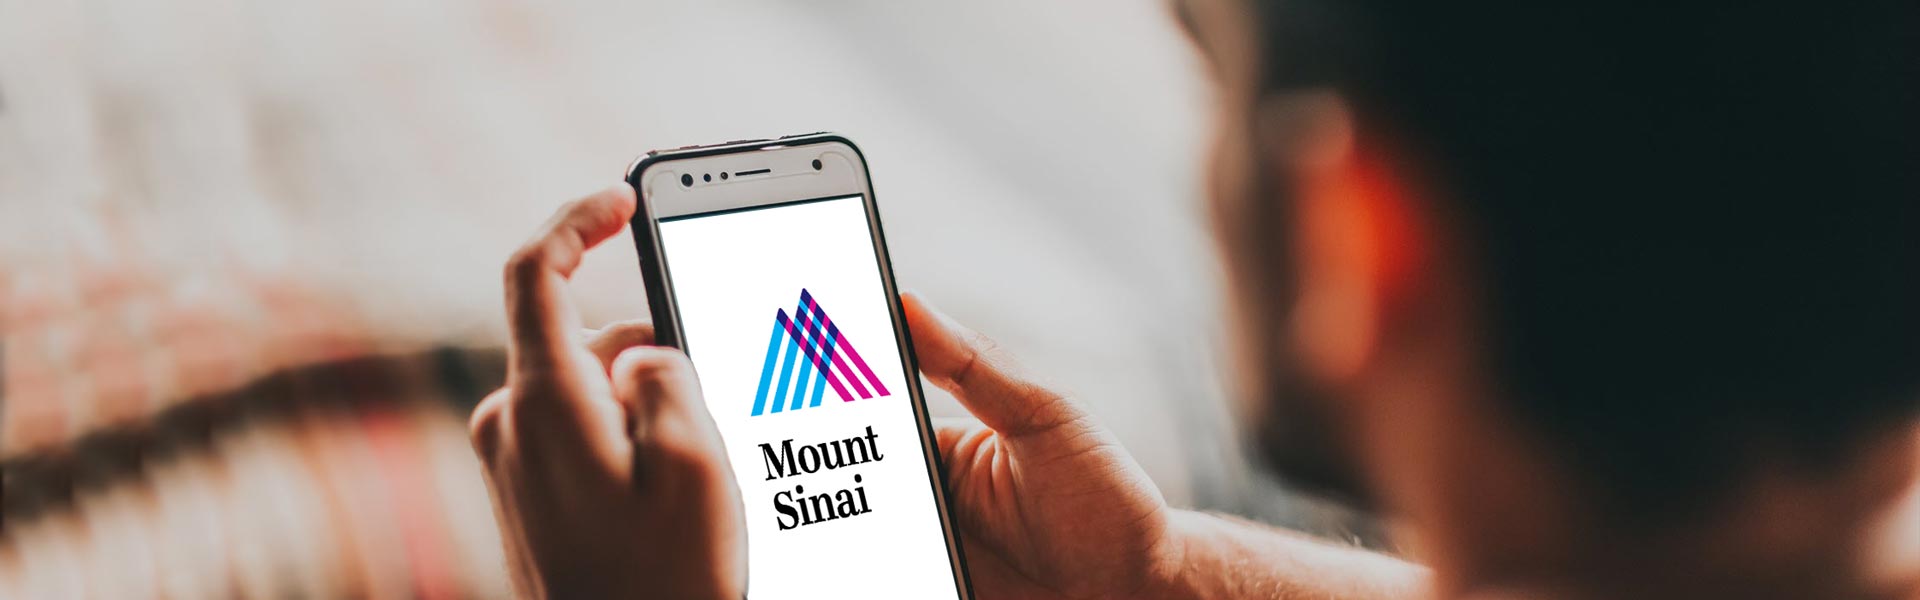 iPhone with a Mount Sinai logo